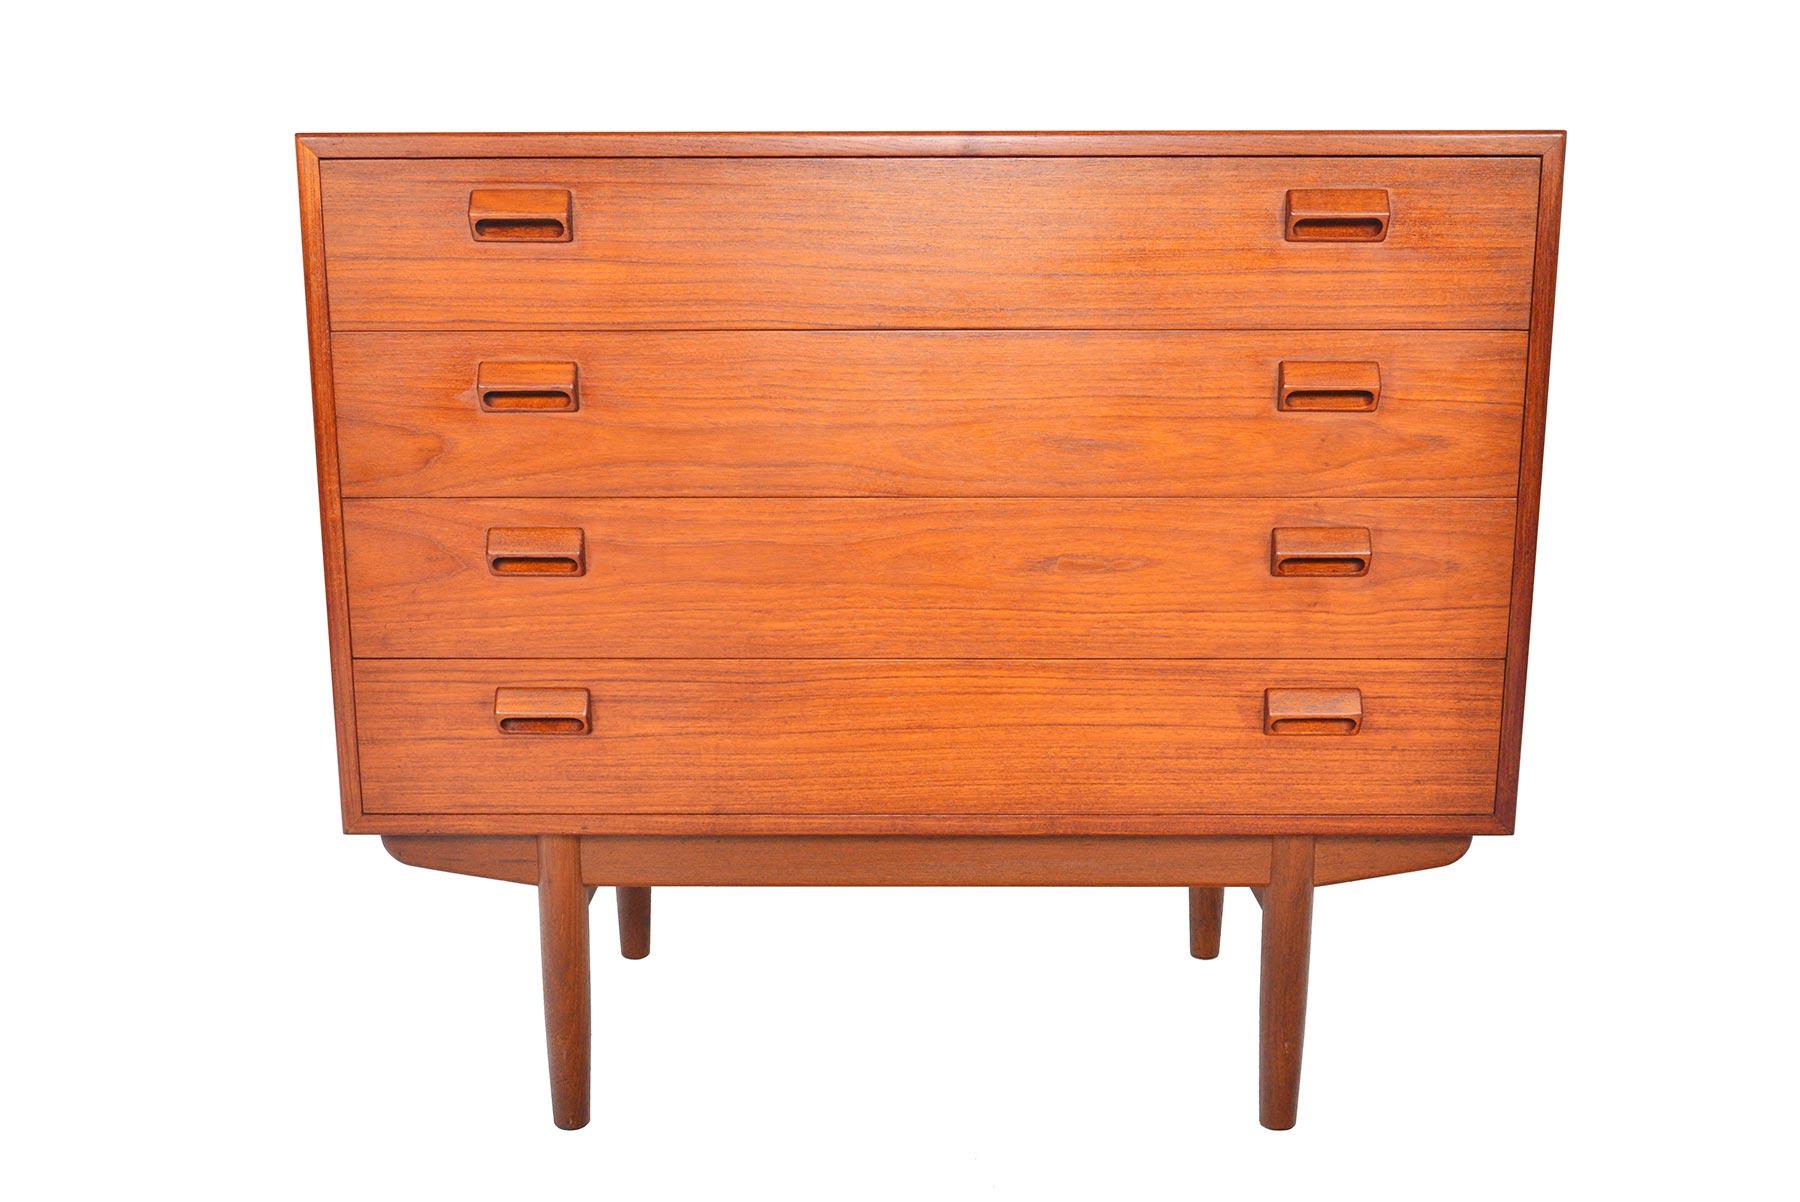 This beautiful gentleman’s chest was designed by Børge Mogensen for Søborg Møbelfabrik in 1951. The case is expertly crafted in teak and stands on a solid teak base. Each drawer front is adorned with the designer’s signature handles. Four deep